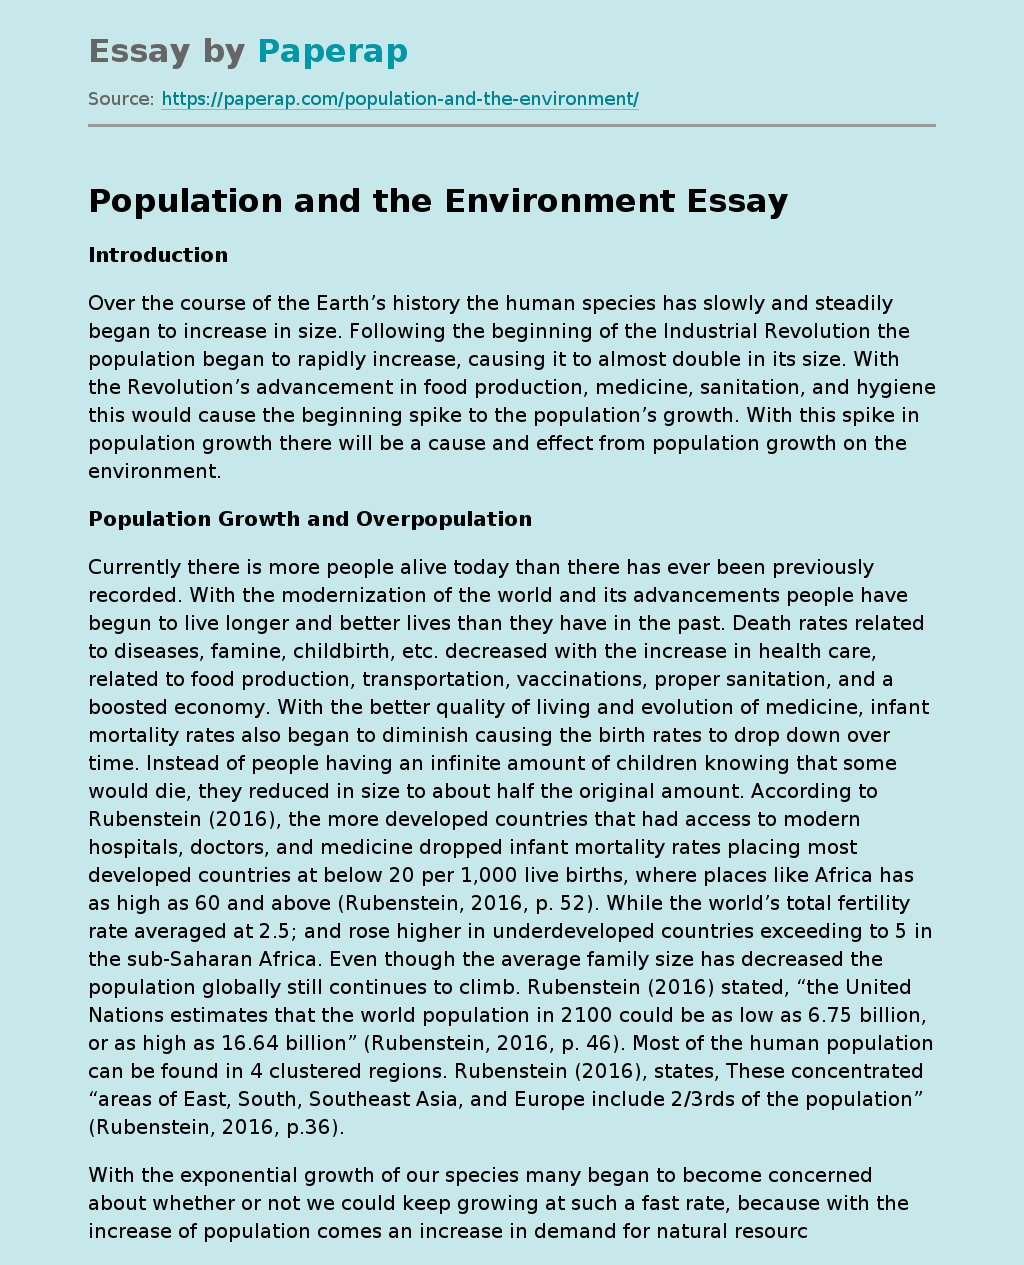 Population and the Environment